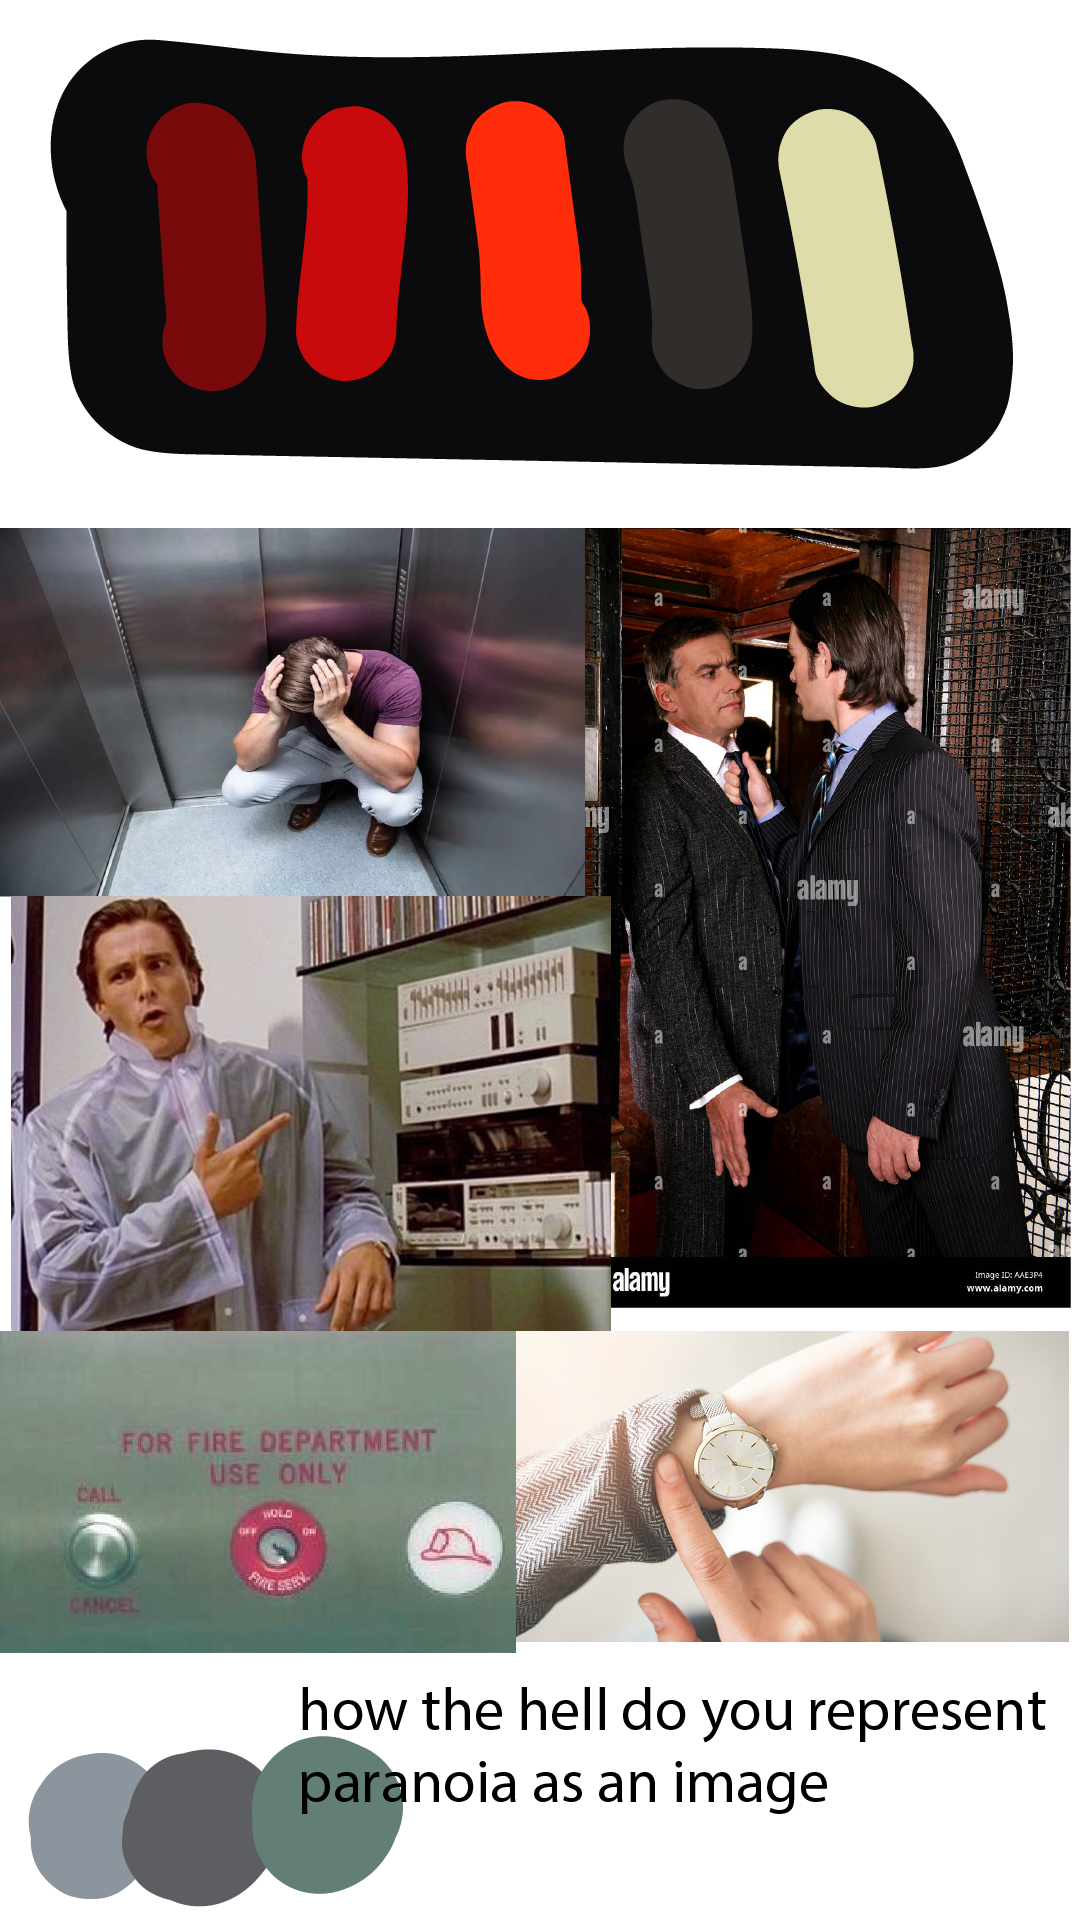 The mood-board made for Elevator. At the top is a small pallete, with jet black, three shades of red, a dark grey, and a bone white. Below are images of someone stuck in an elevator, people arguing in an elevator, and the iconic axe-murder scene from American Psycho.